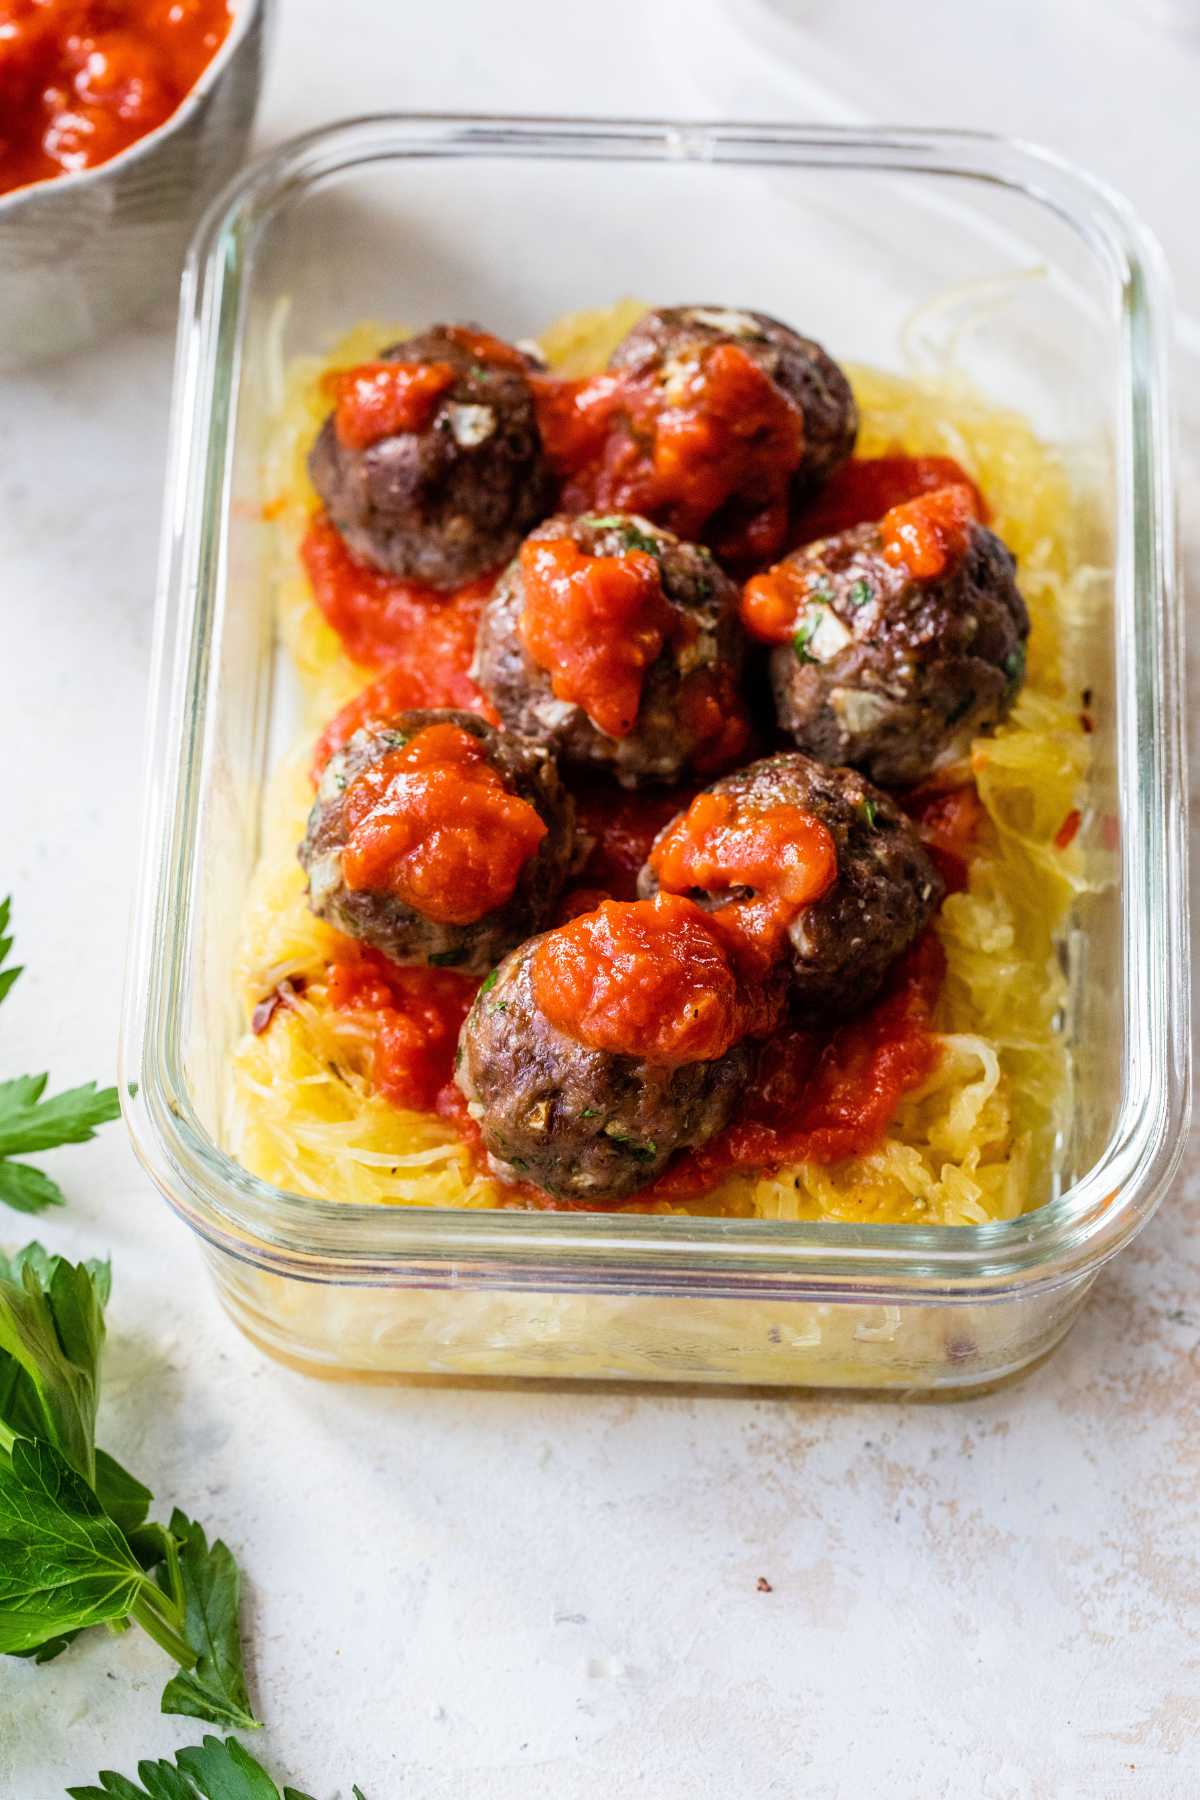 Meatballs served over spaghetti squash with red sauce.